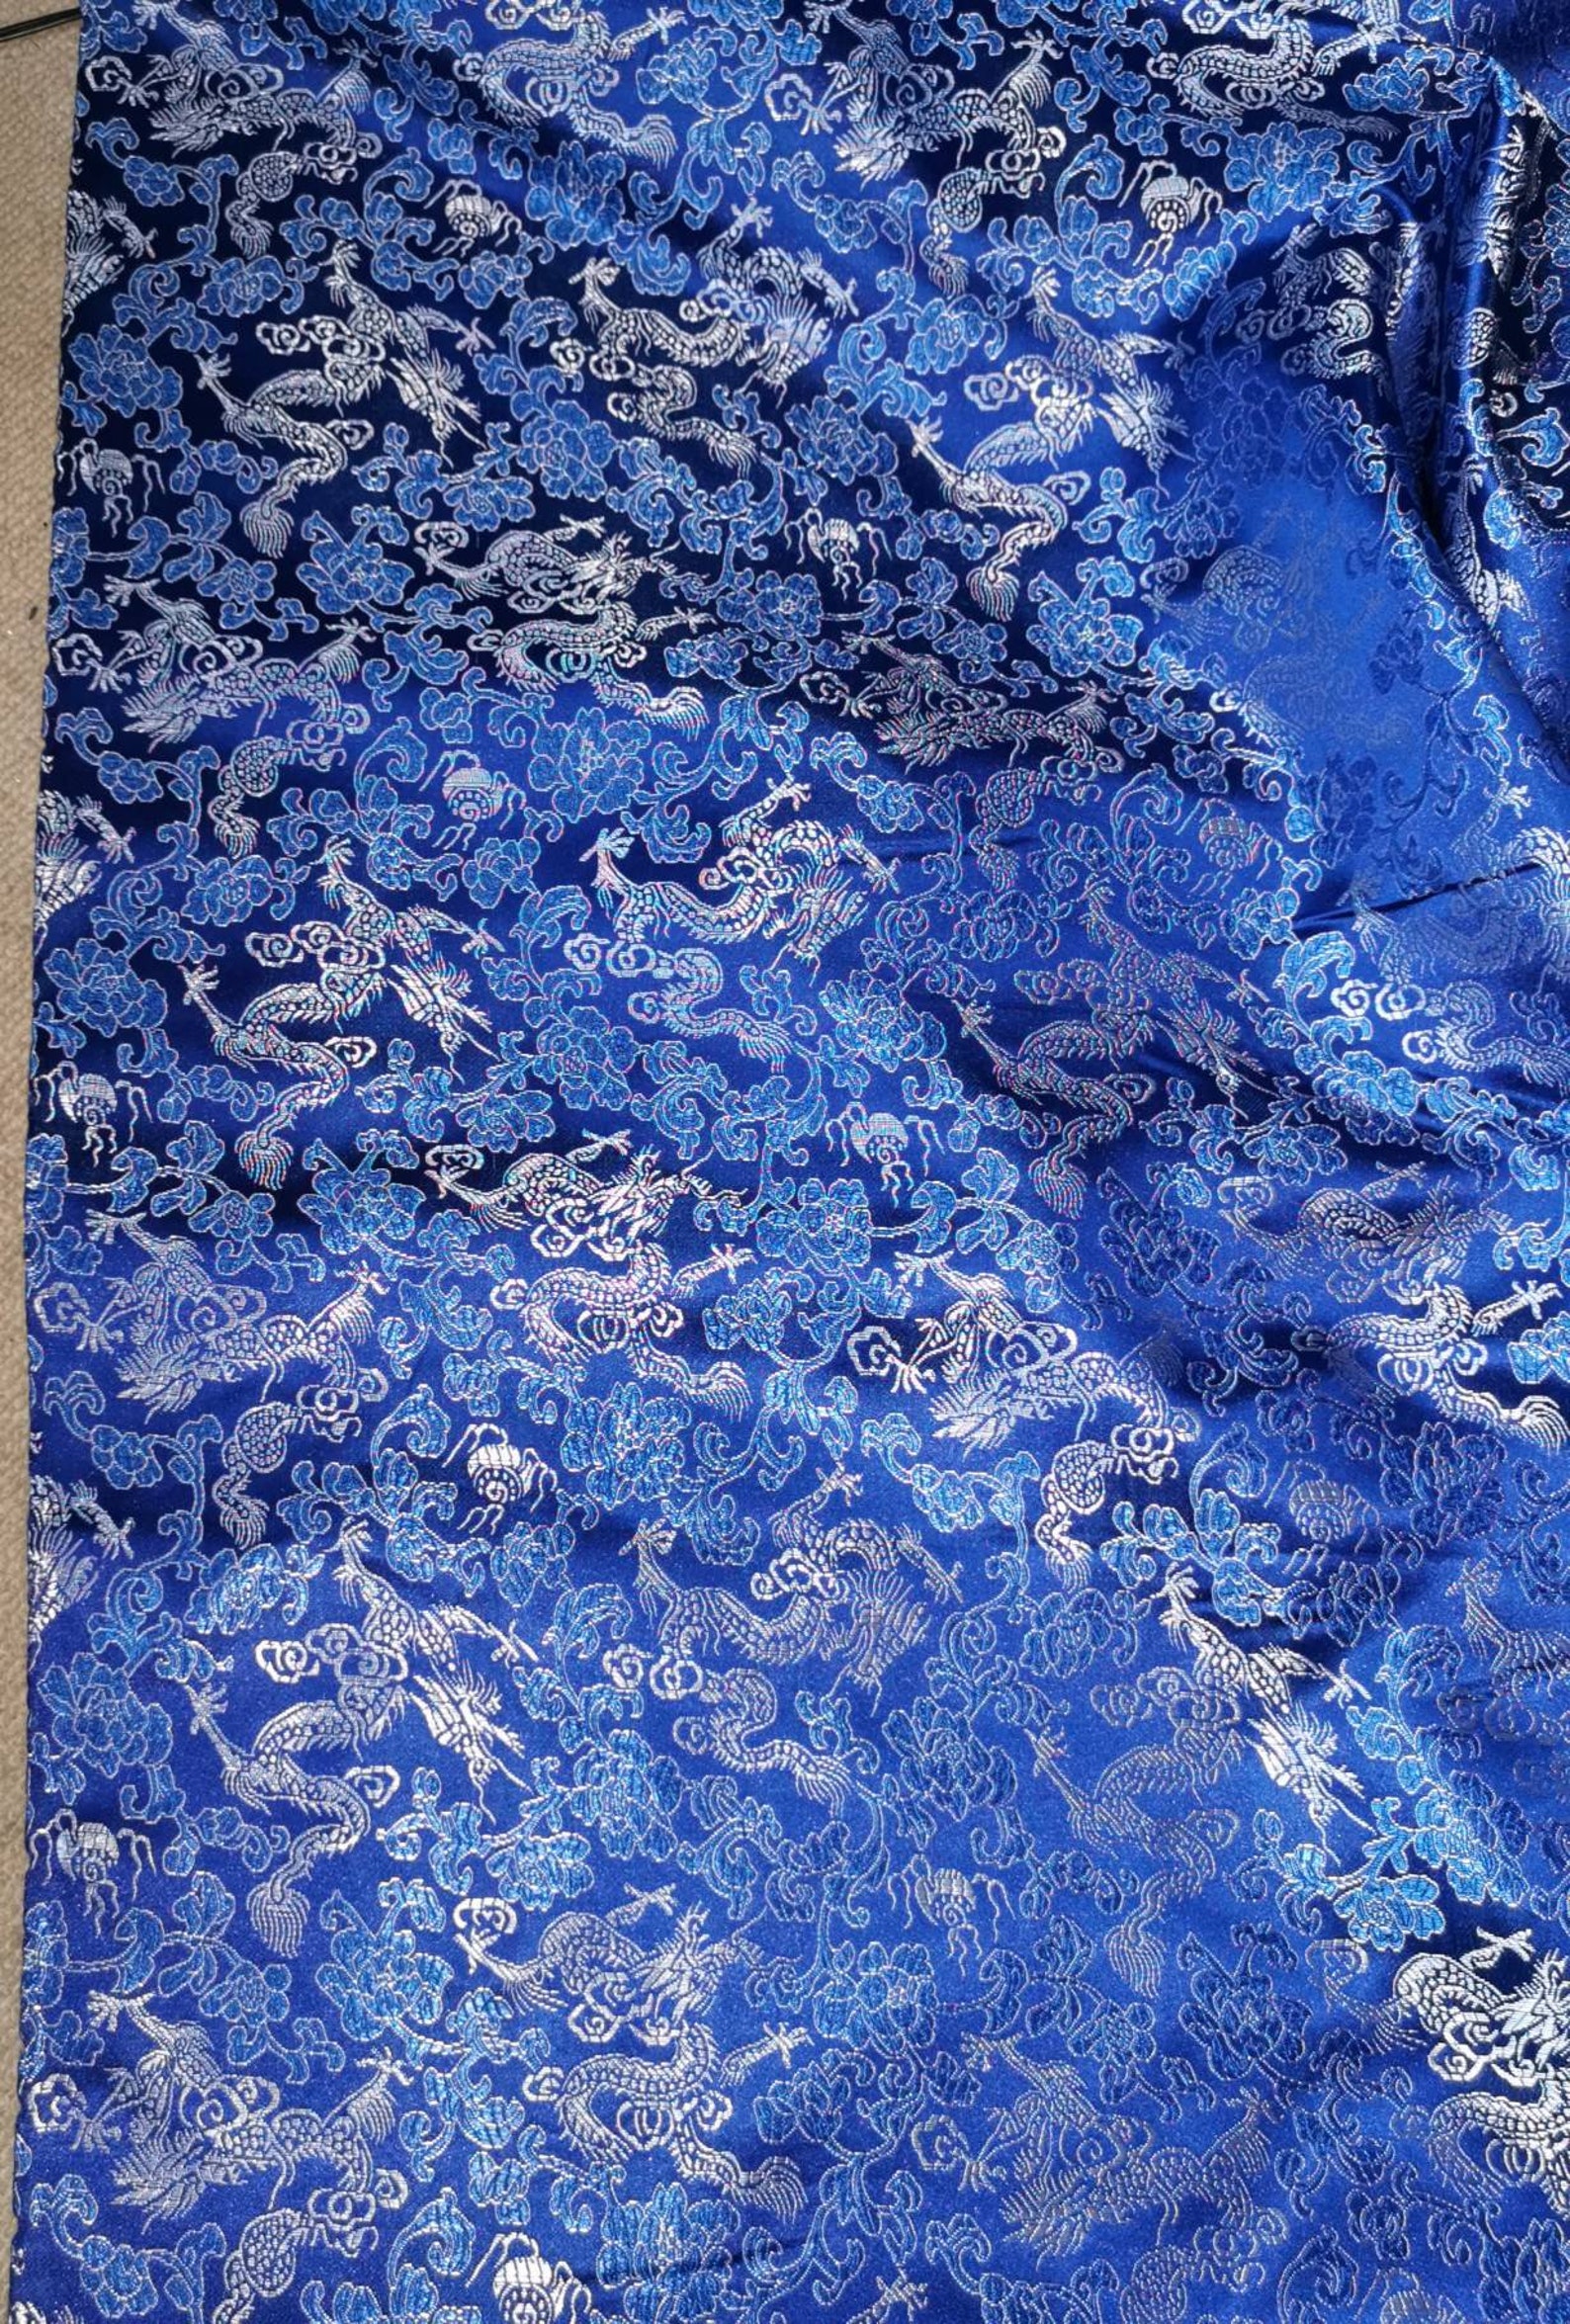 Satin royal blue jacquard brocade fabric with Chinese silver | Etsy